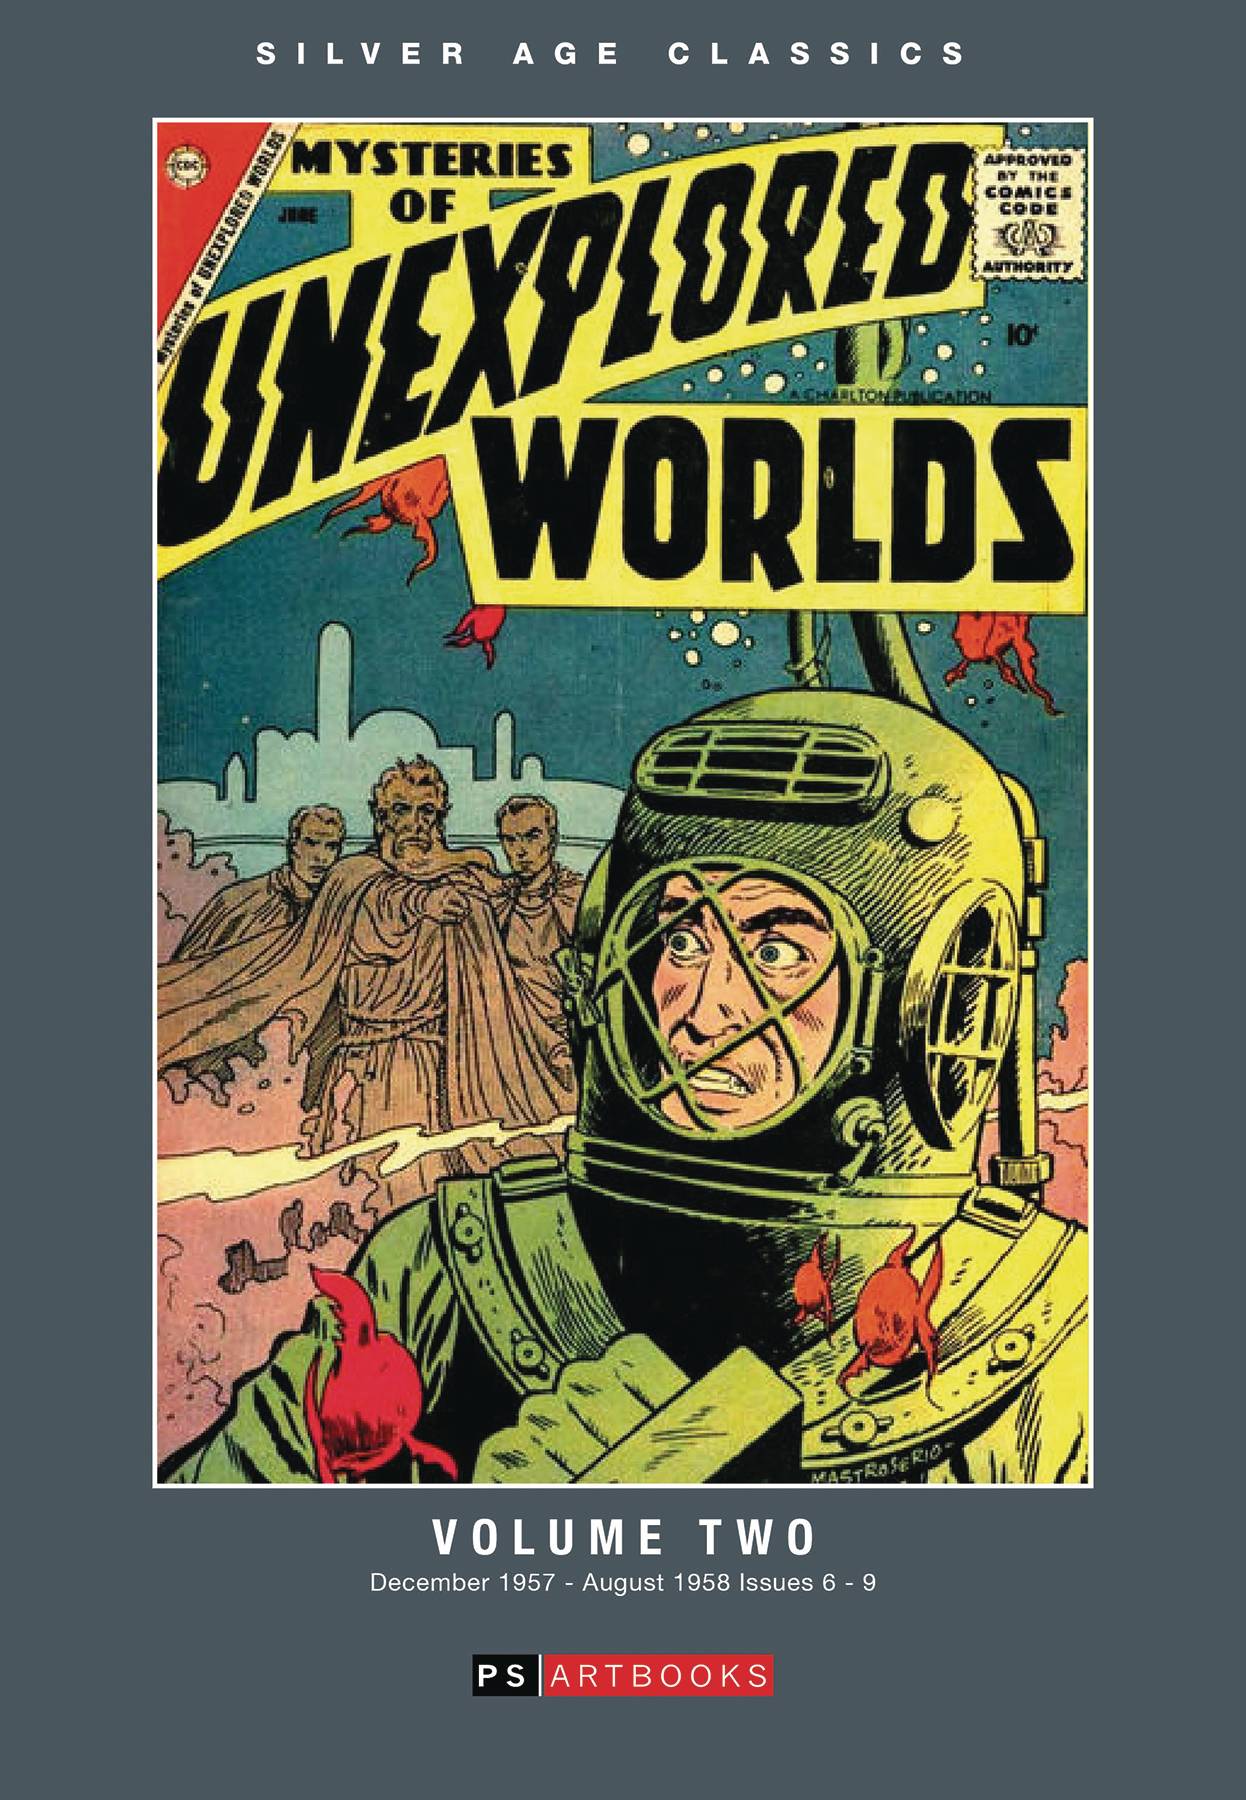 SILVER AGE CLASSICS MYSTERIES OF UNEXPLORED WORLDS HC VOL 02